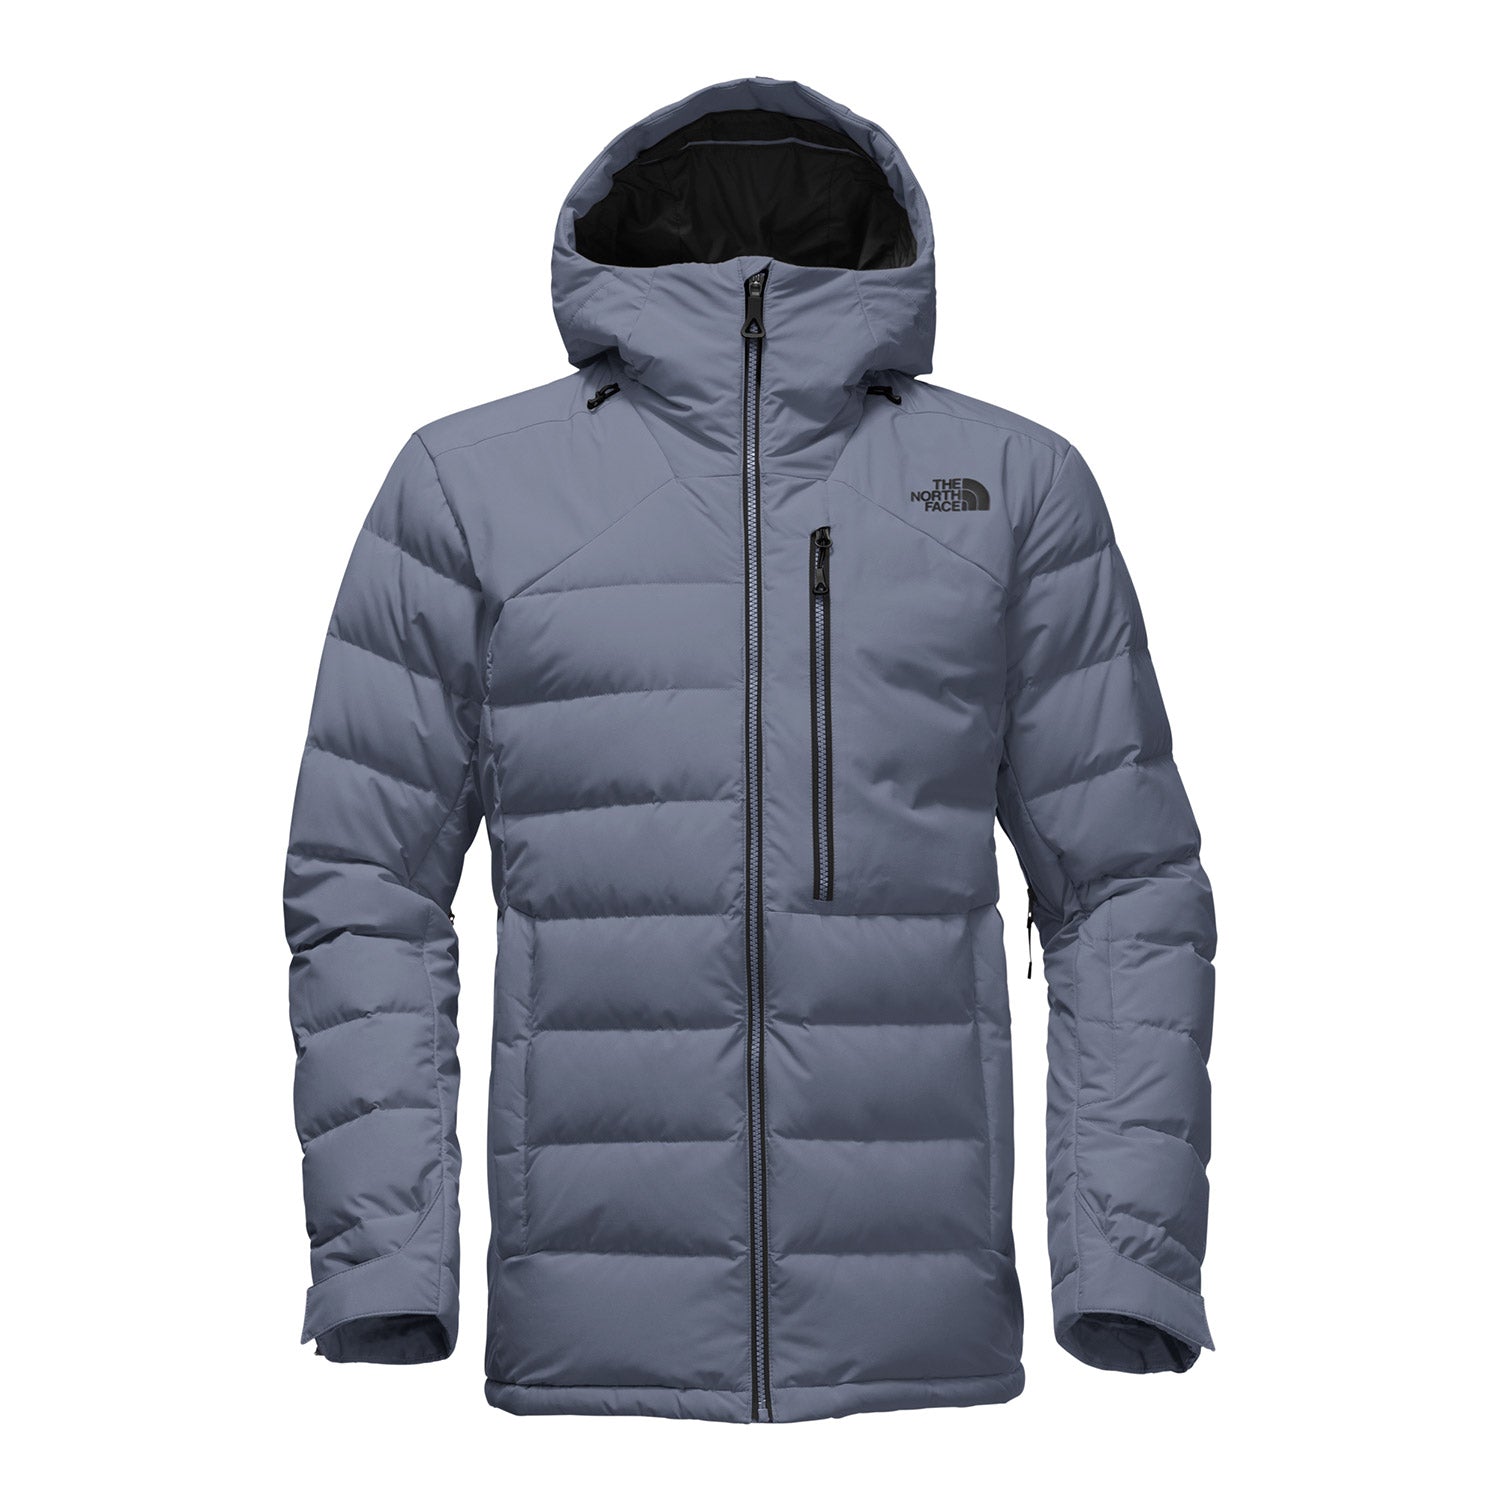 north face corefire jacket review